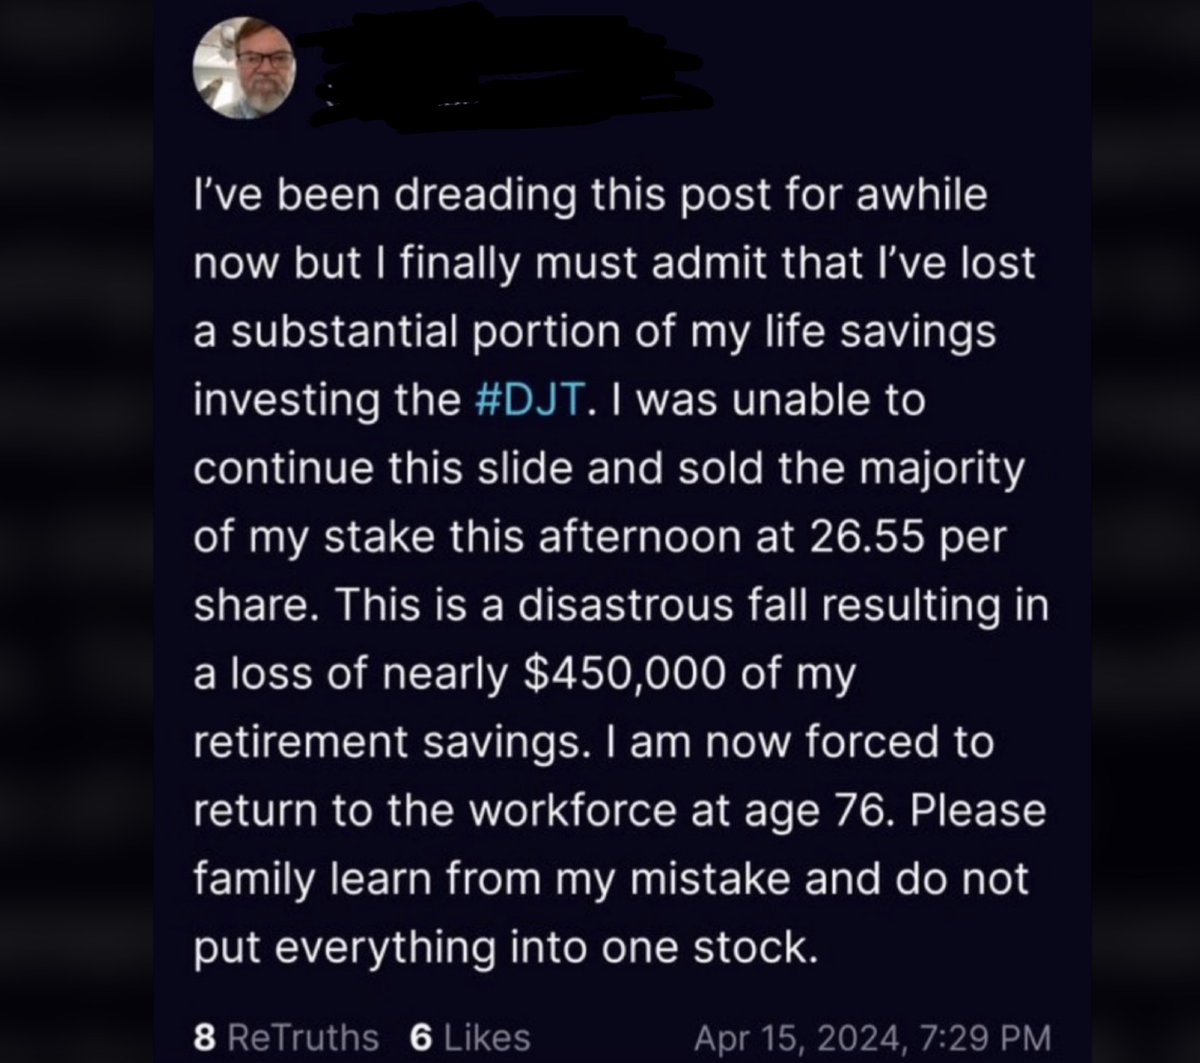 The poor guy invested in DJT stock to own the libs, and lost his retirement savings. Should we start a gofundme for him?